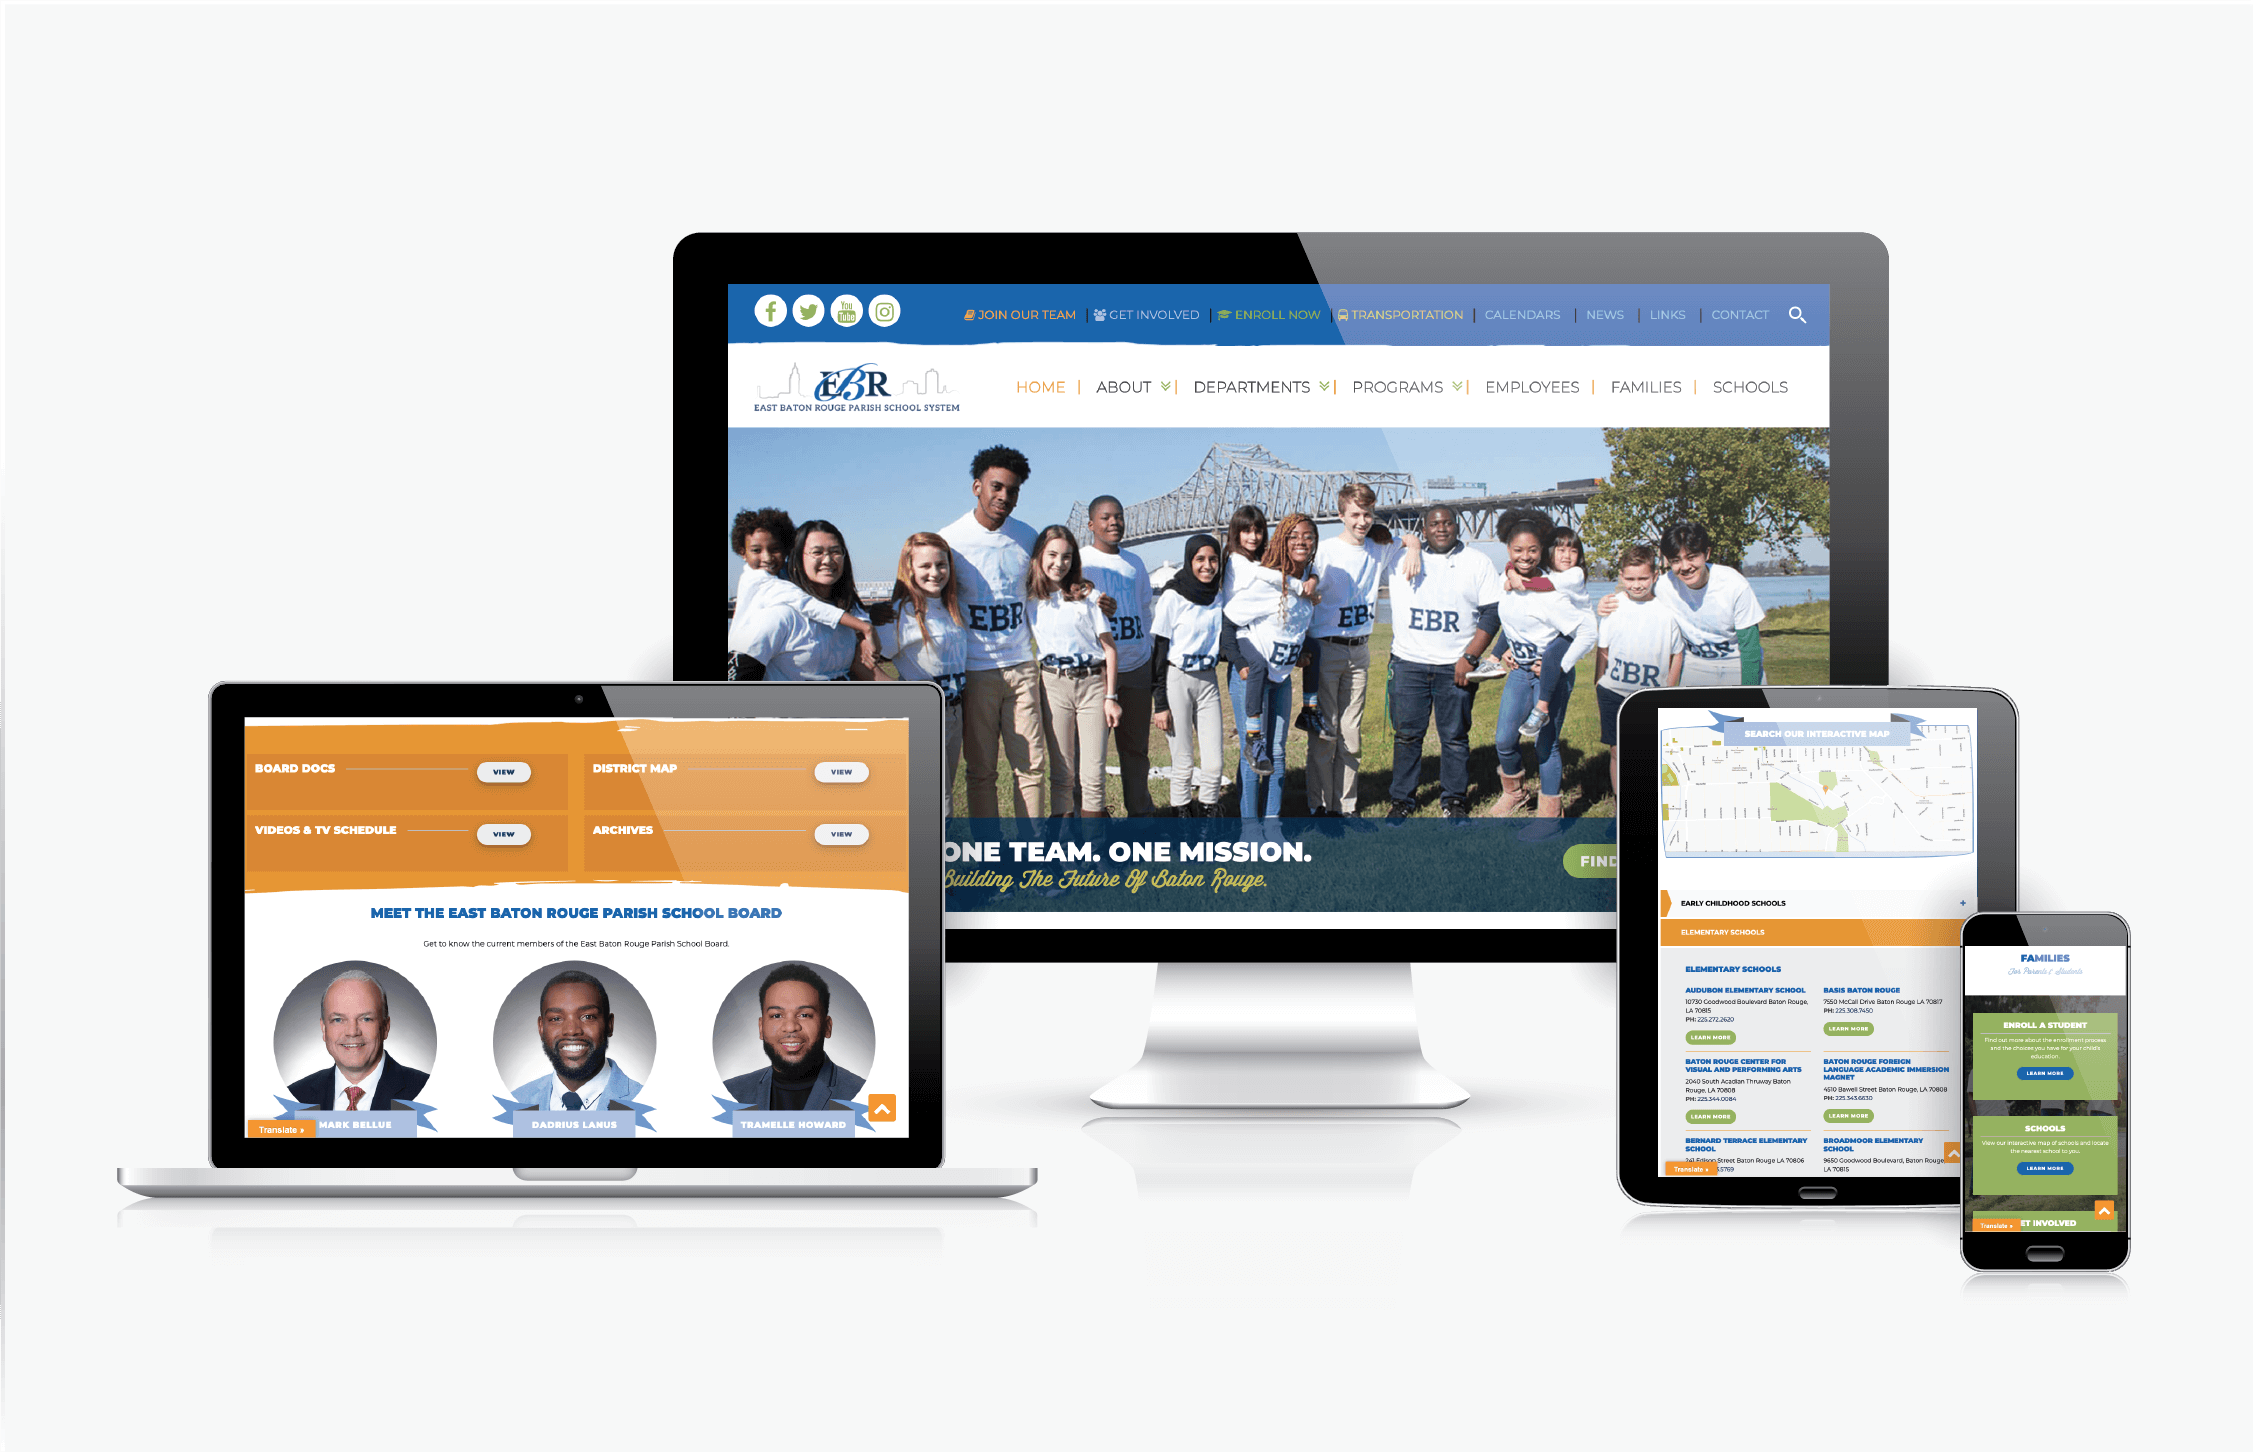 Torapath Technologies Launches The Brand New Website For The East Baton Rouge Parish School System!